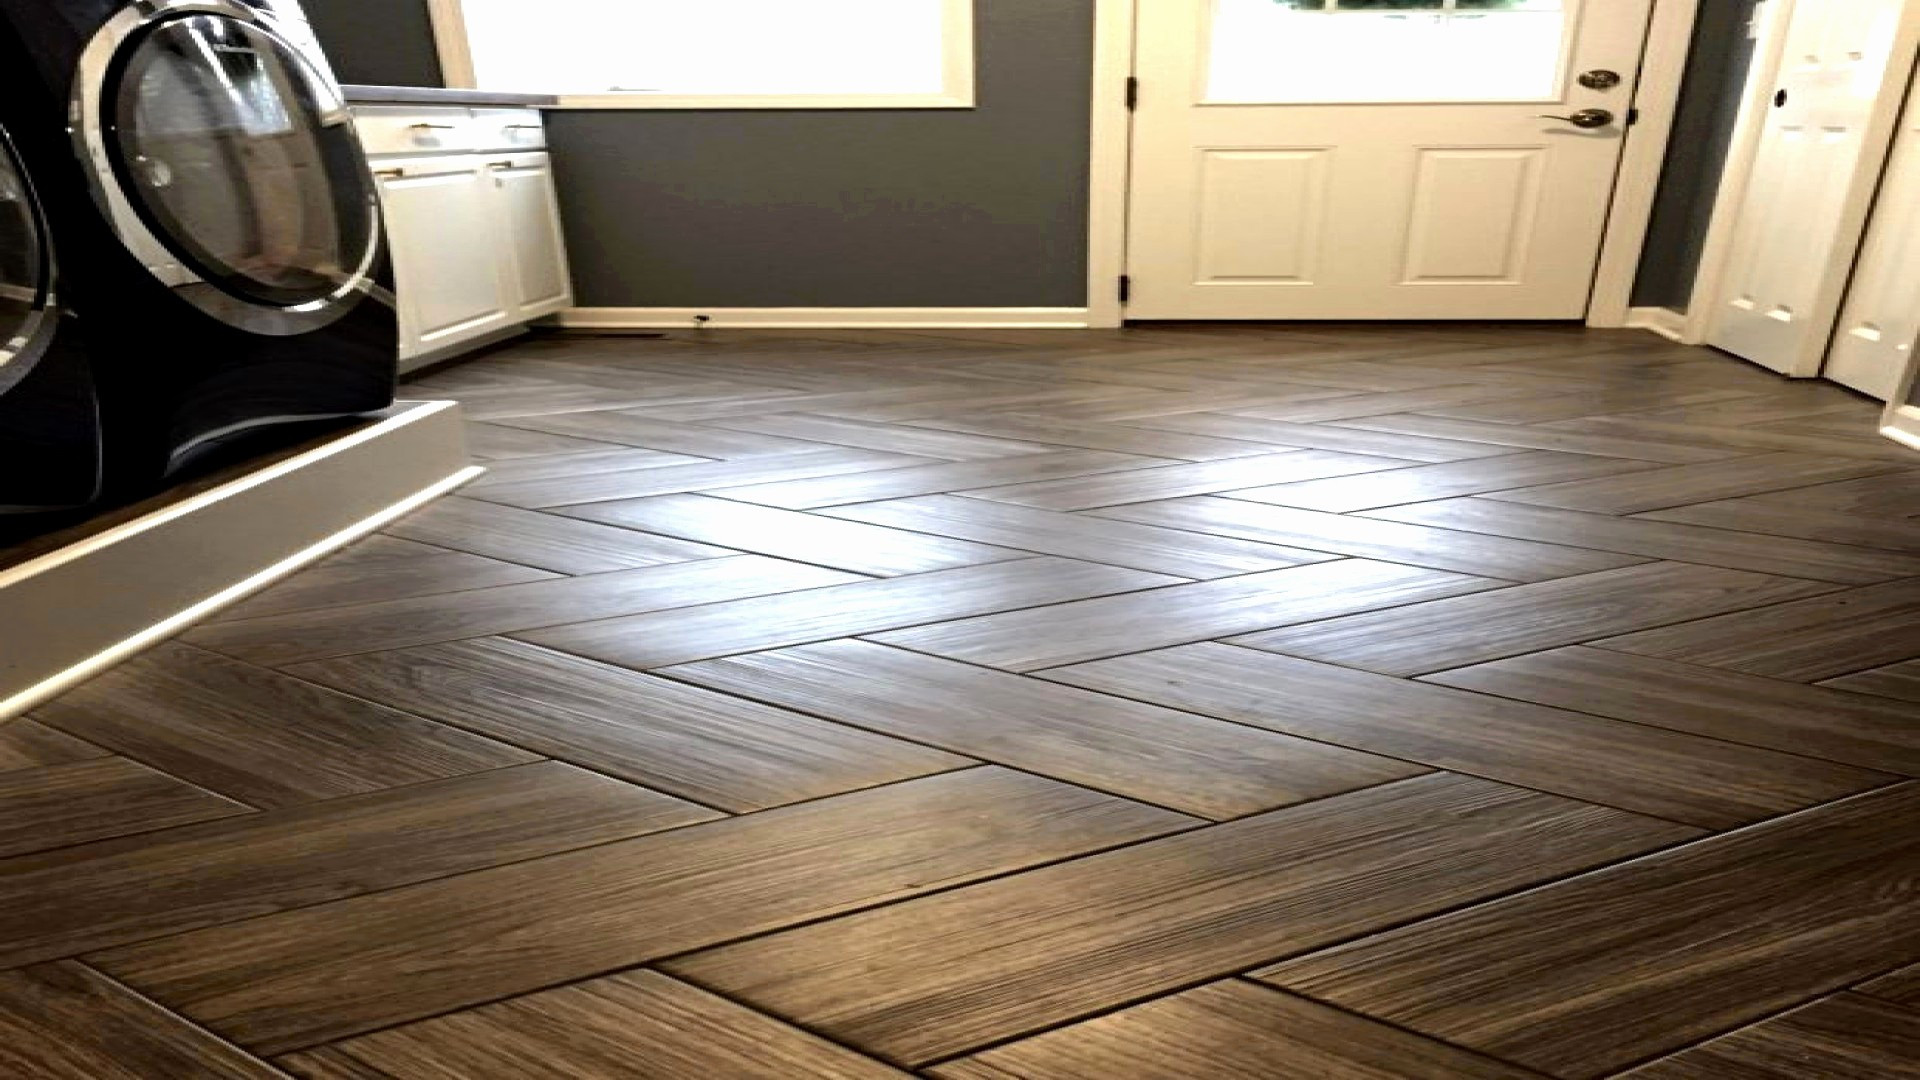 bruce hardwood floor cleaner where to buy of 19 awesome hardwood flooring for sale photograph dizpos com in hardwood flooring for sale best of 52 luxury wood flooring sale 52 s photograph